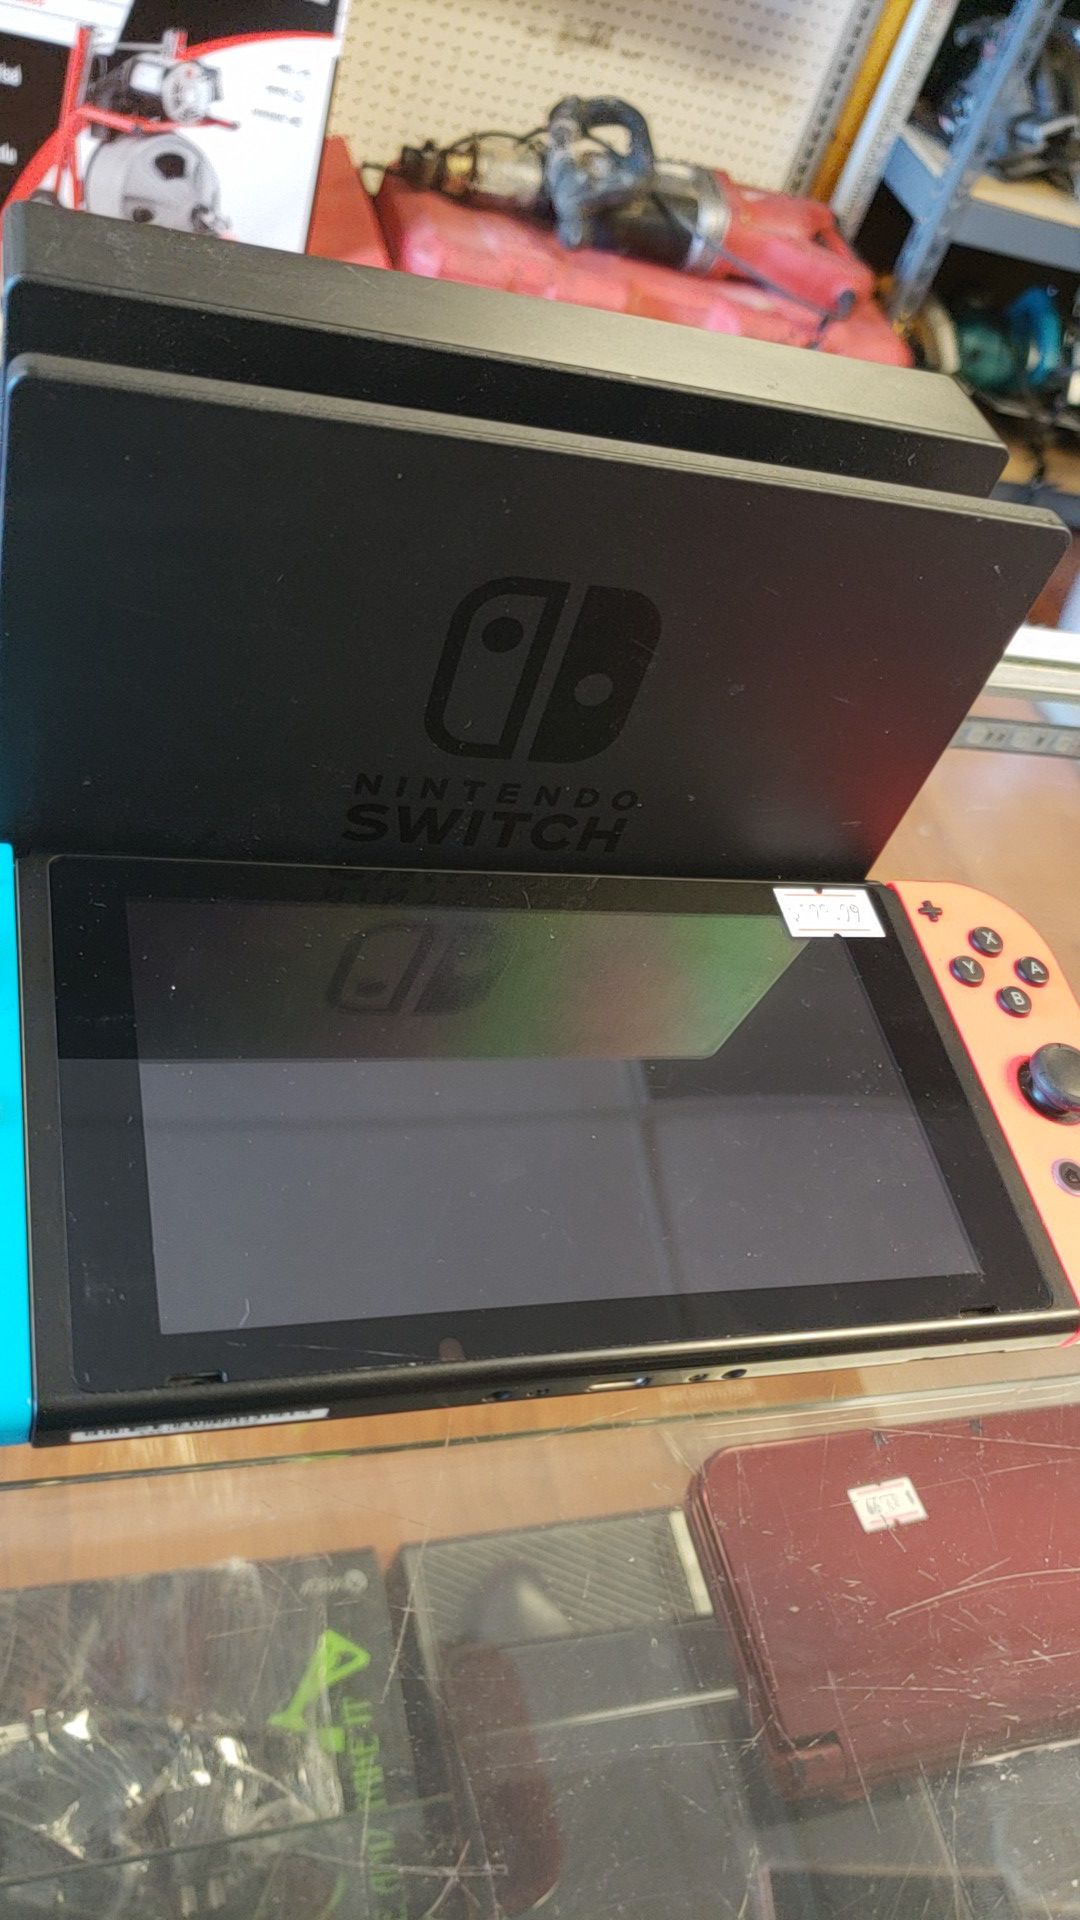 Nintendo Switch Game System